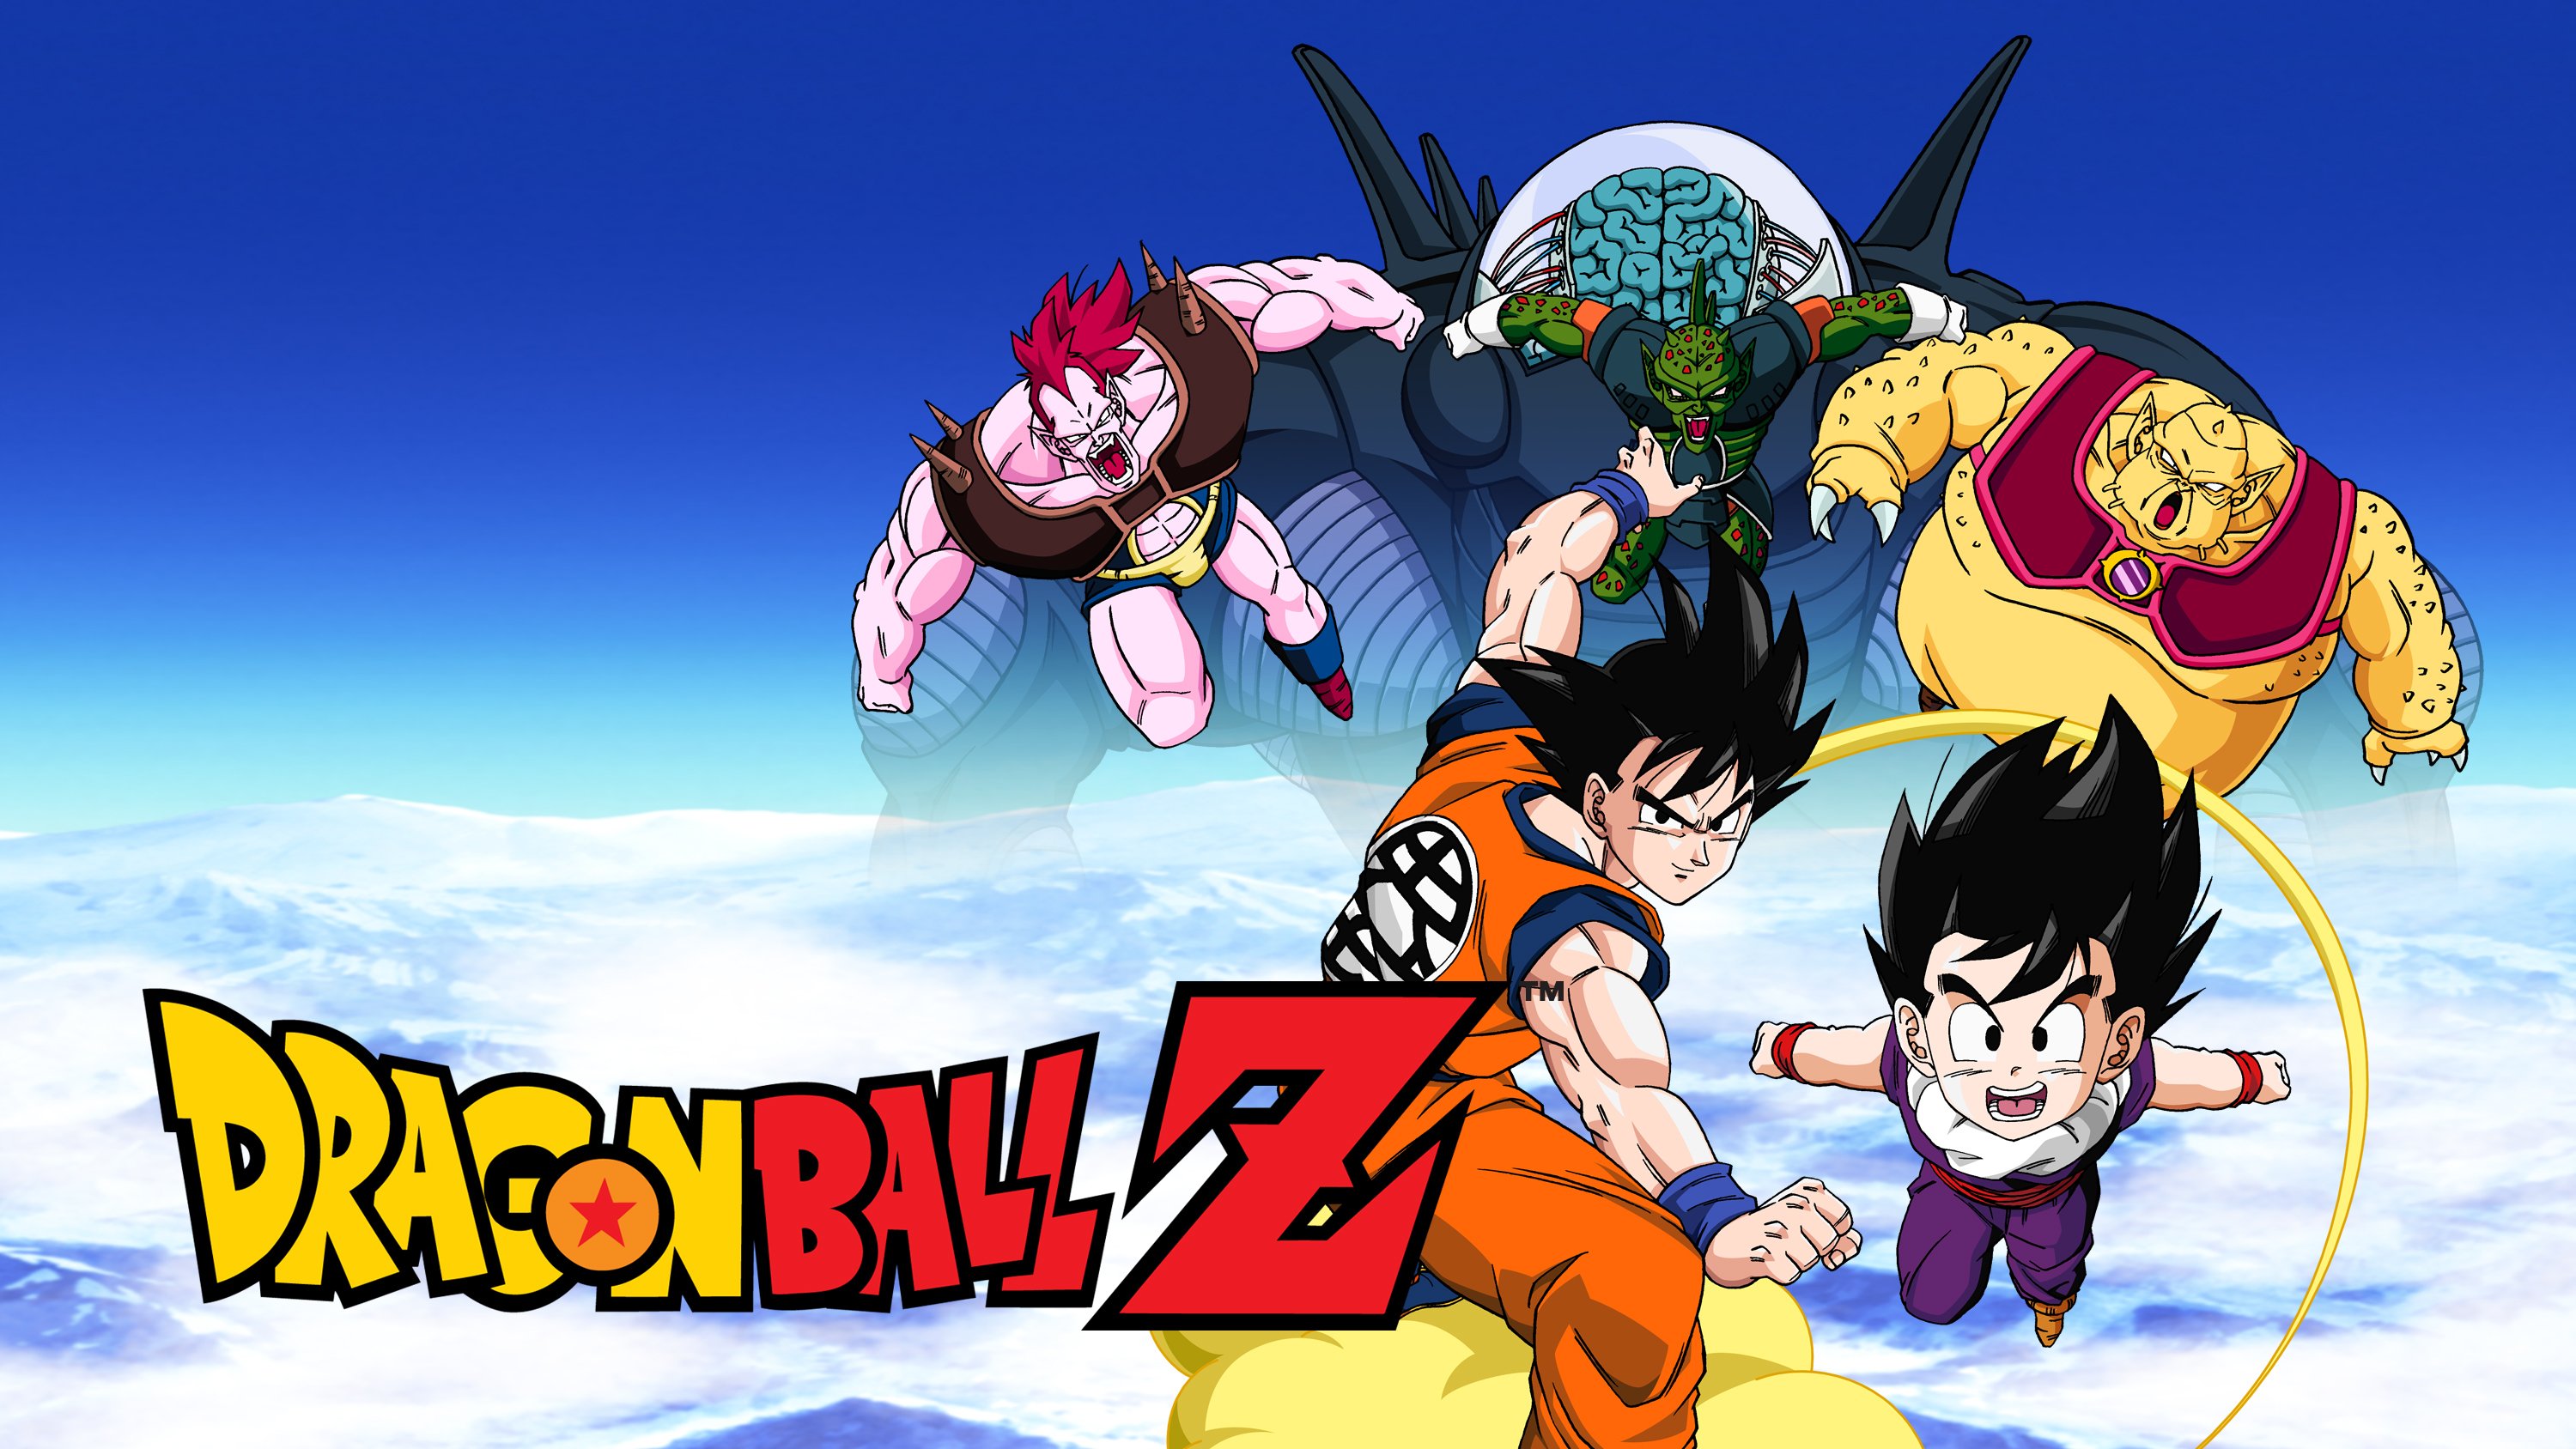 Dragon Ball Z Is Coming To Blu Ray In The Uk With 30th Anniversary Limited Edition Box Set Anime Uk News